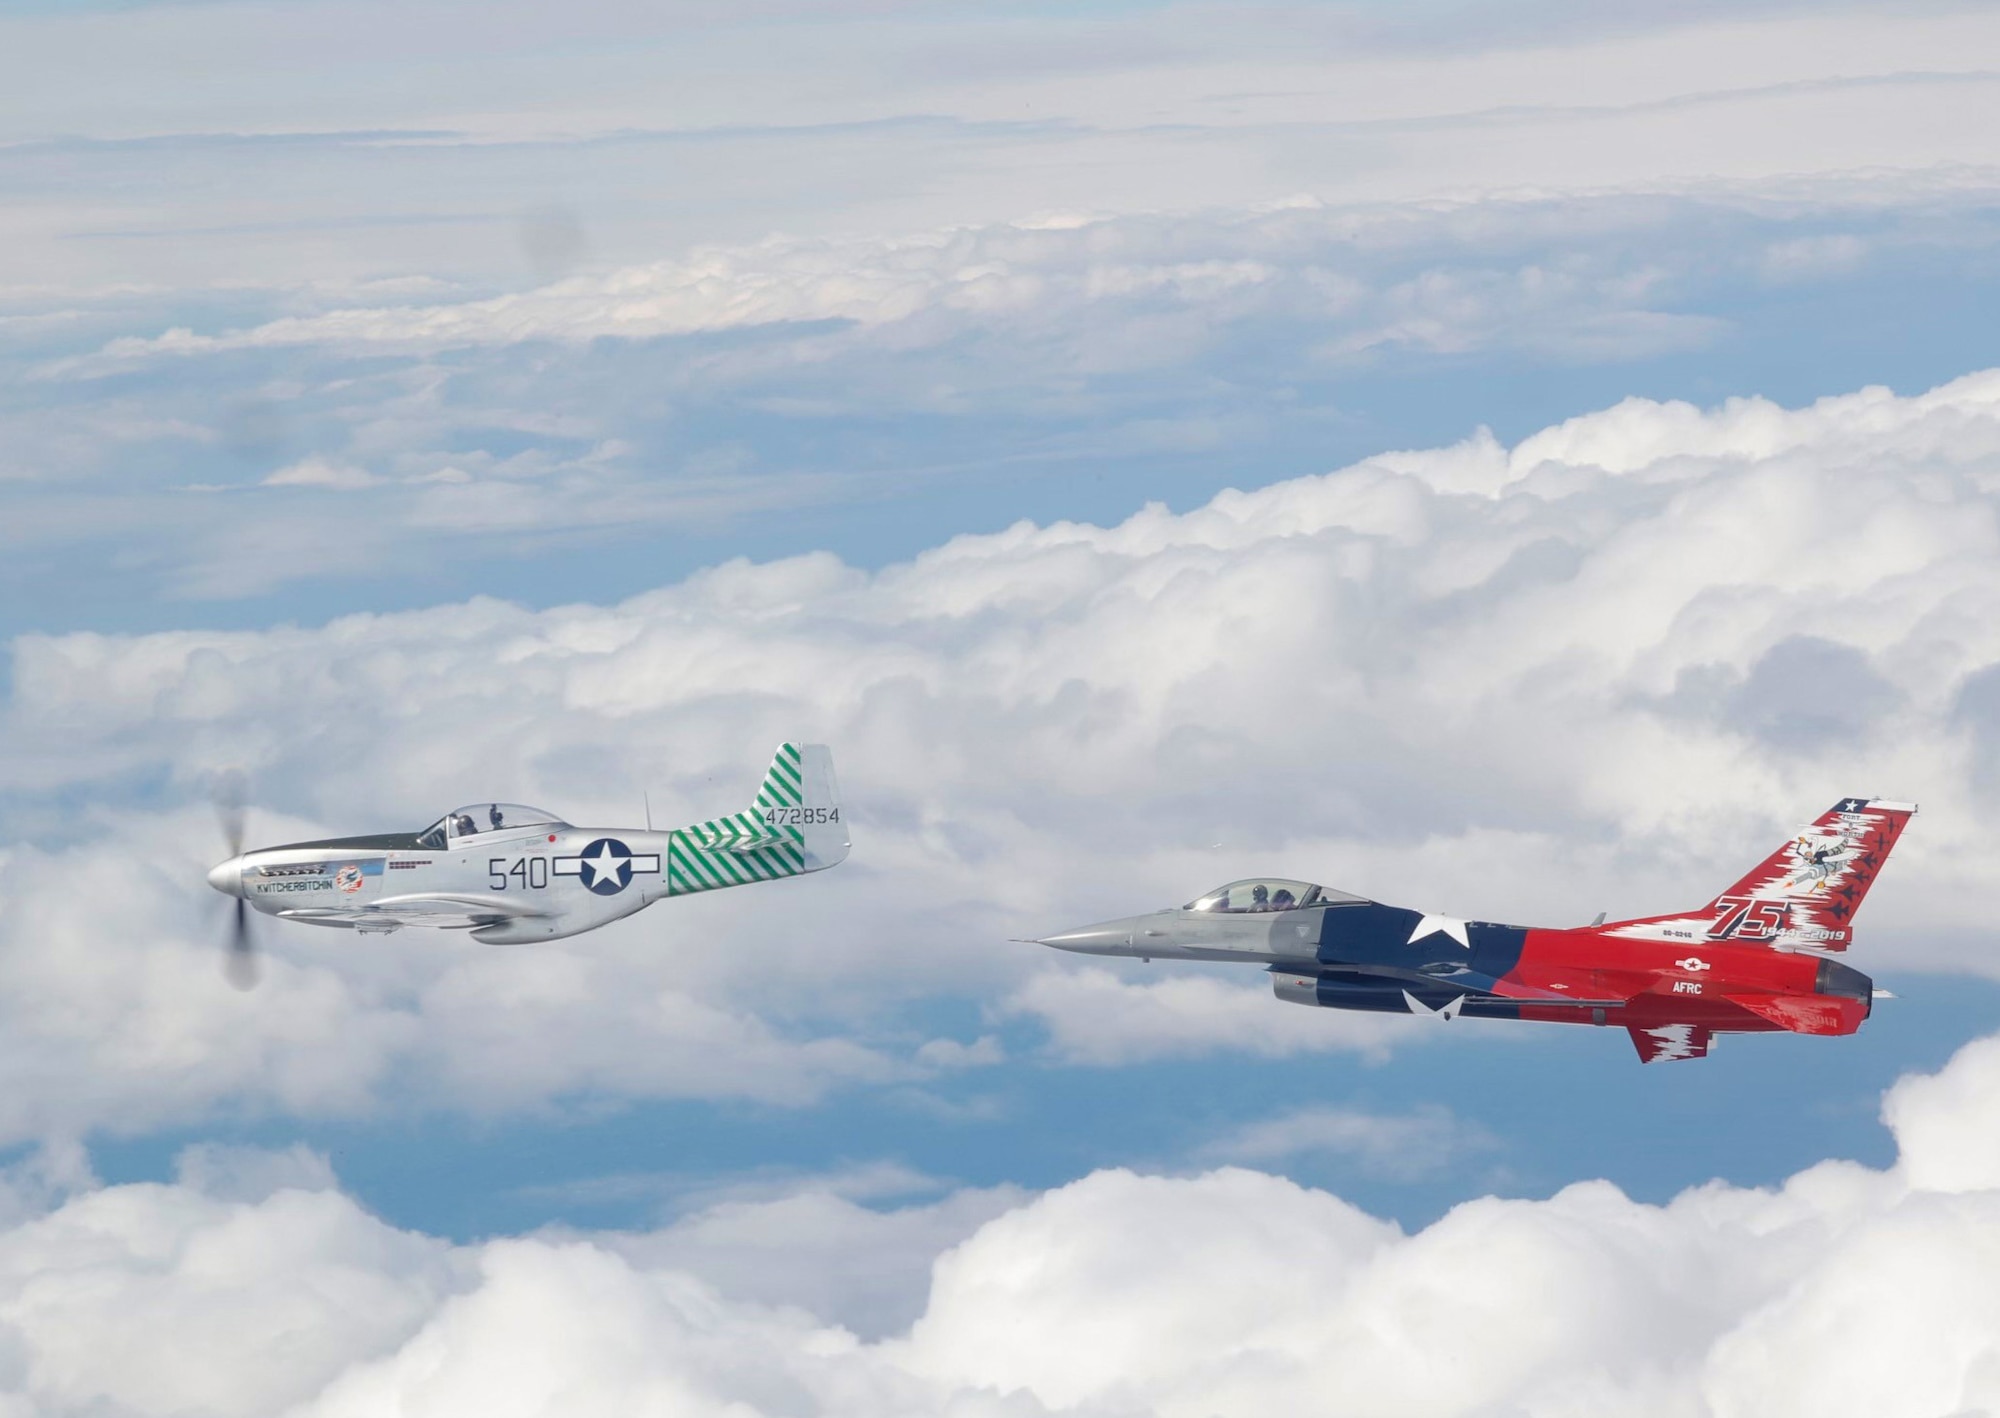 A P-51 Mustang and a 457th Fighter Squadron F-16 Fighting Falcon fly over the east coast of the United States Friday, April 16, 2021. The flight commemorated the 75th anniversary of the squadron, which was activated on Oct. 21, 1944. The P-51 was the first aircraft assigned to the squadron. (U.S. Air Force photo by 1st Lt. Savanah Bray)